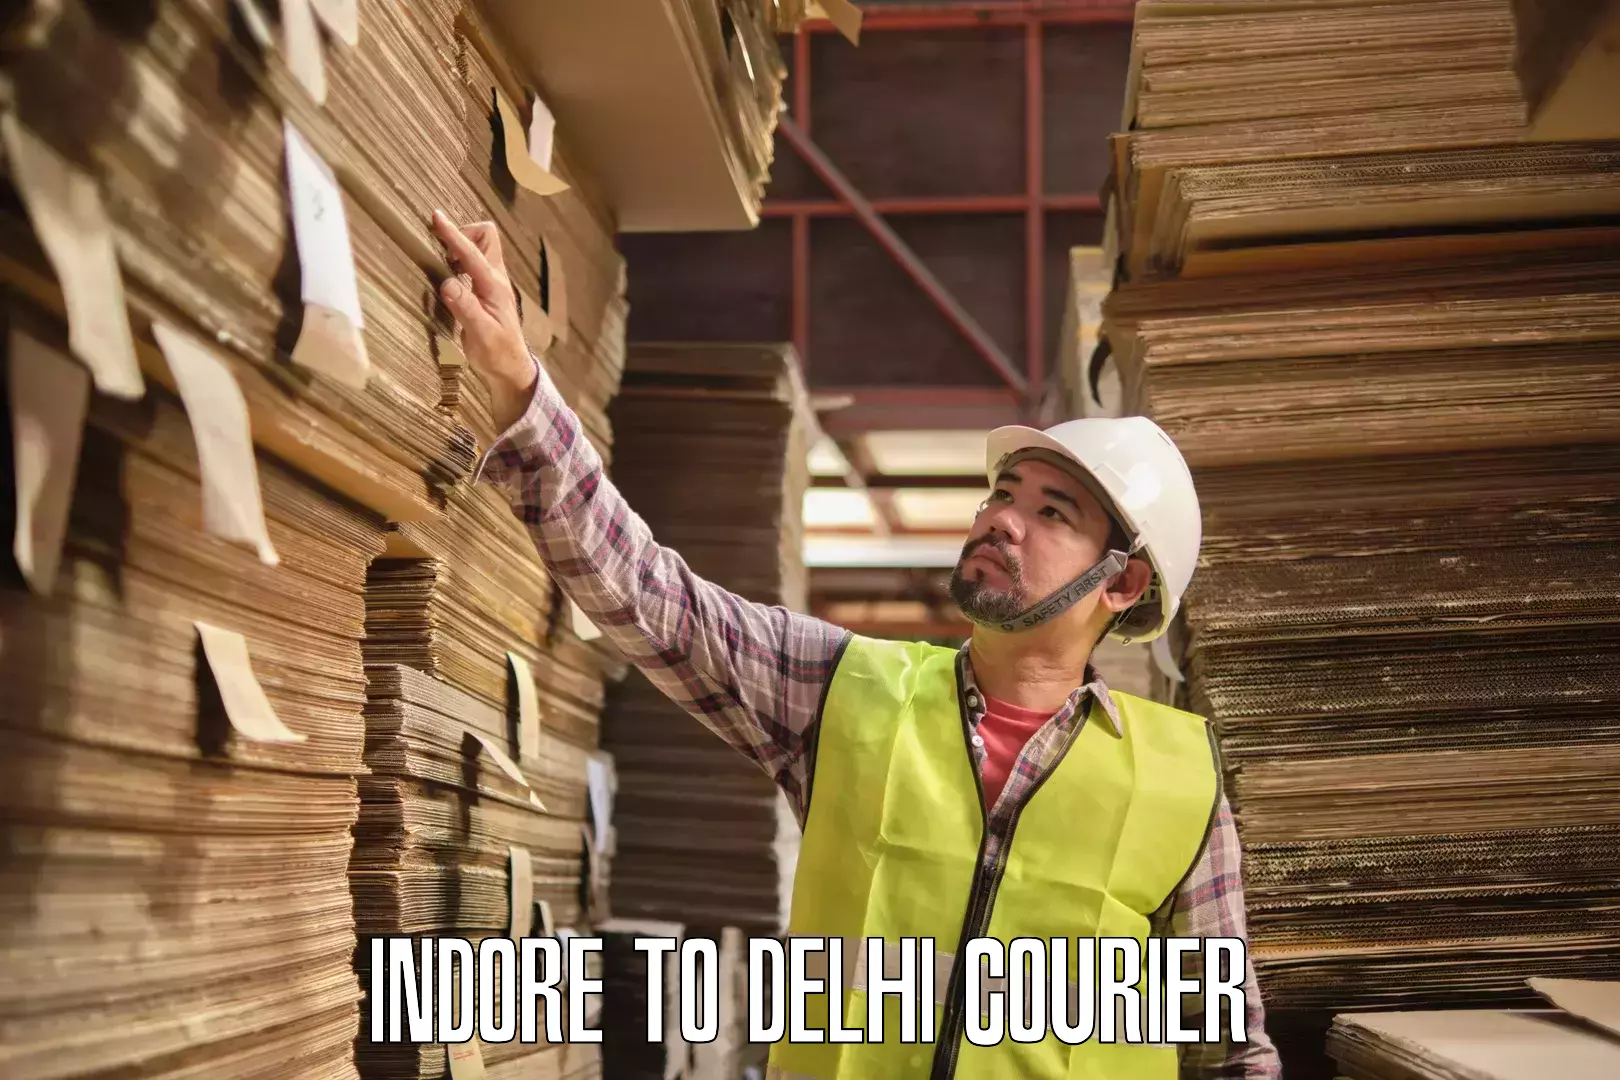 Professional courier handling Indore to Delhi